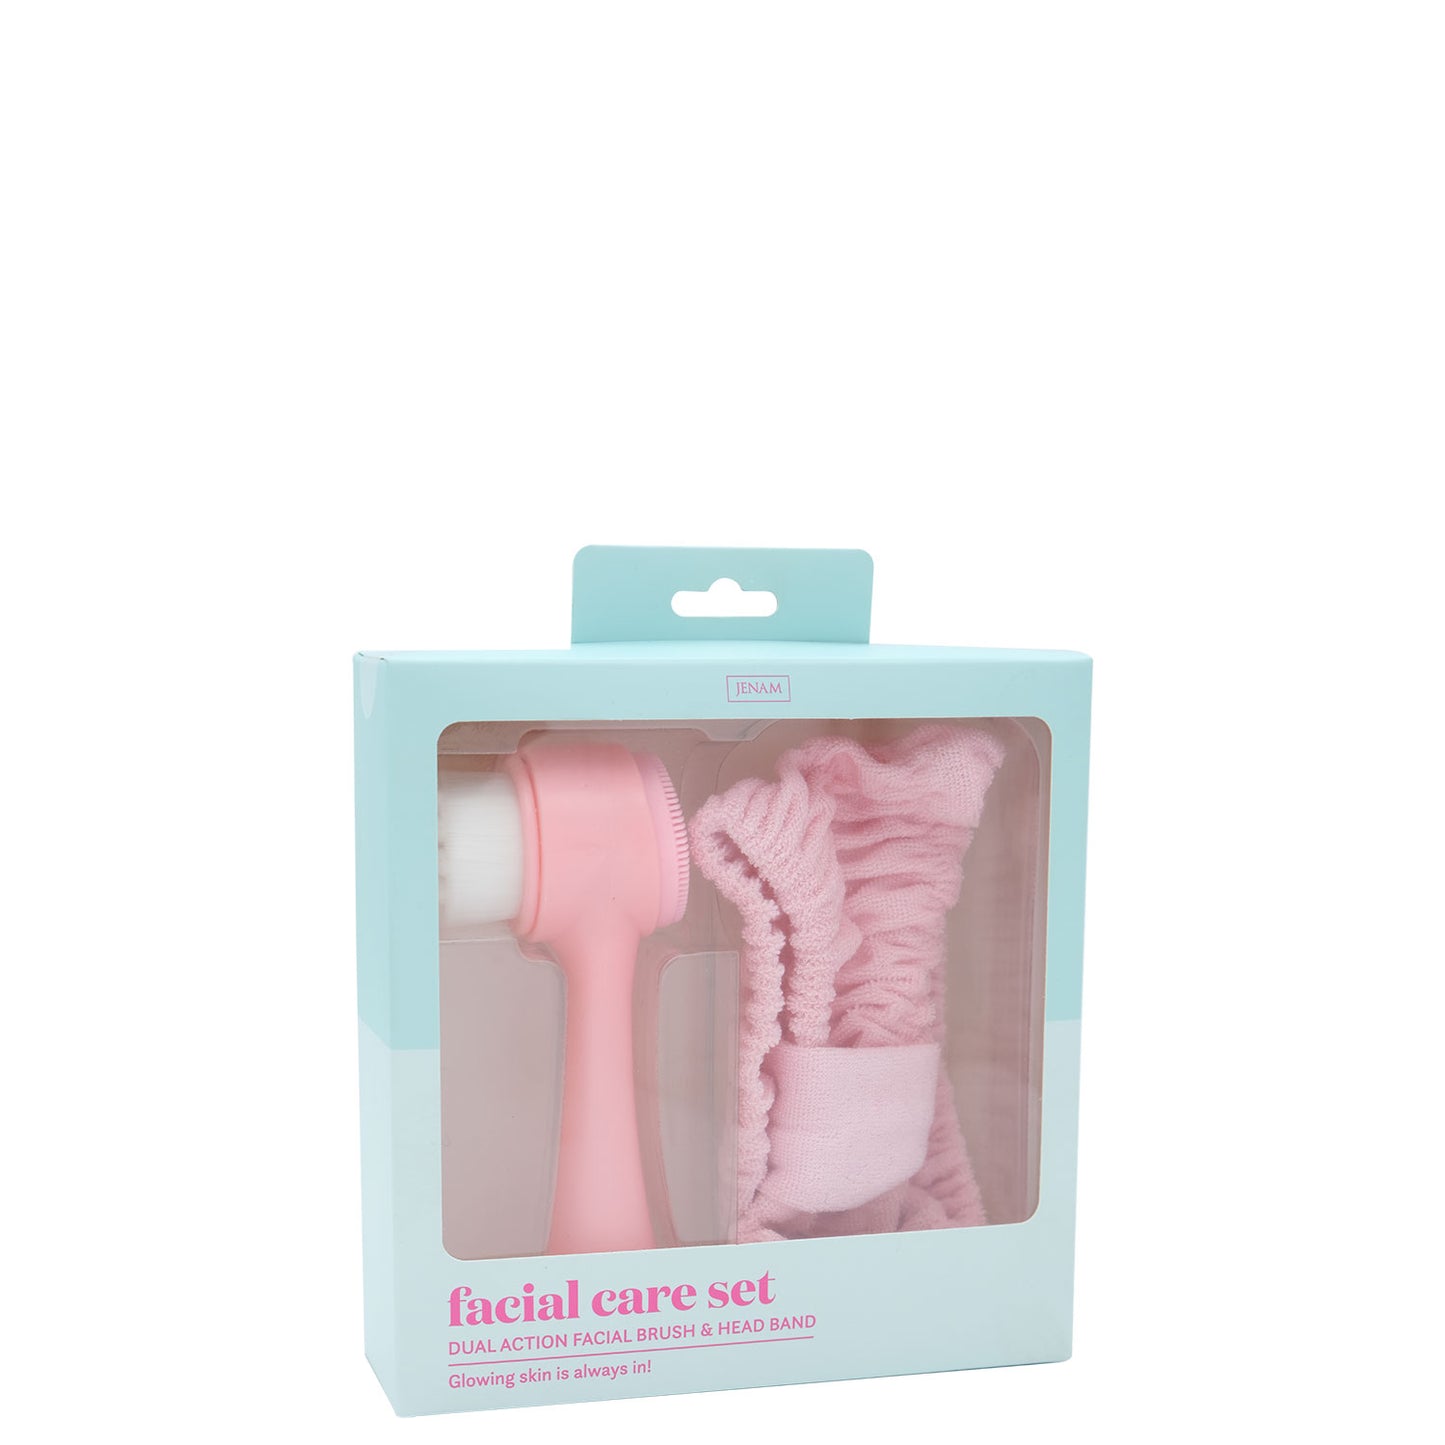 Beauty Bar - Facial Care Set (Glowing Skin Always In) (Dual Action Facial Brush & Head Band)